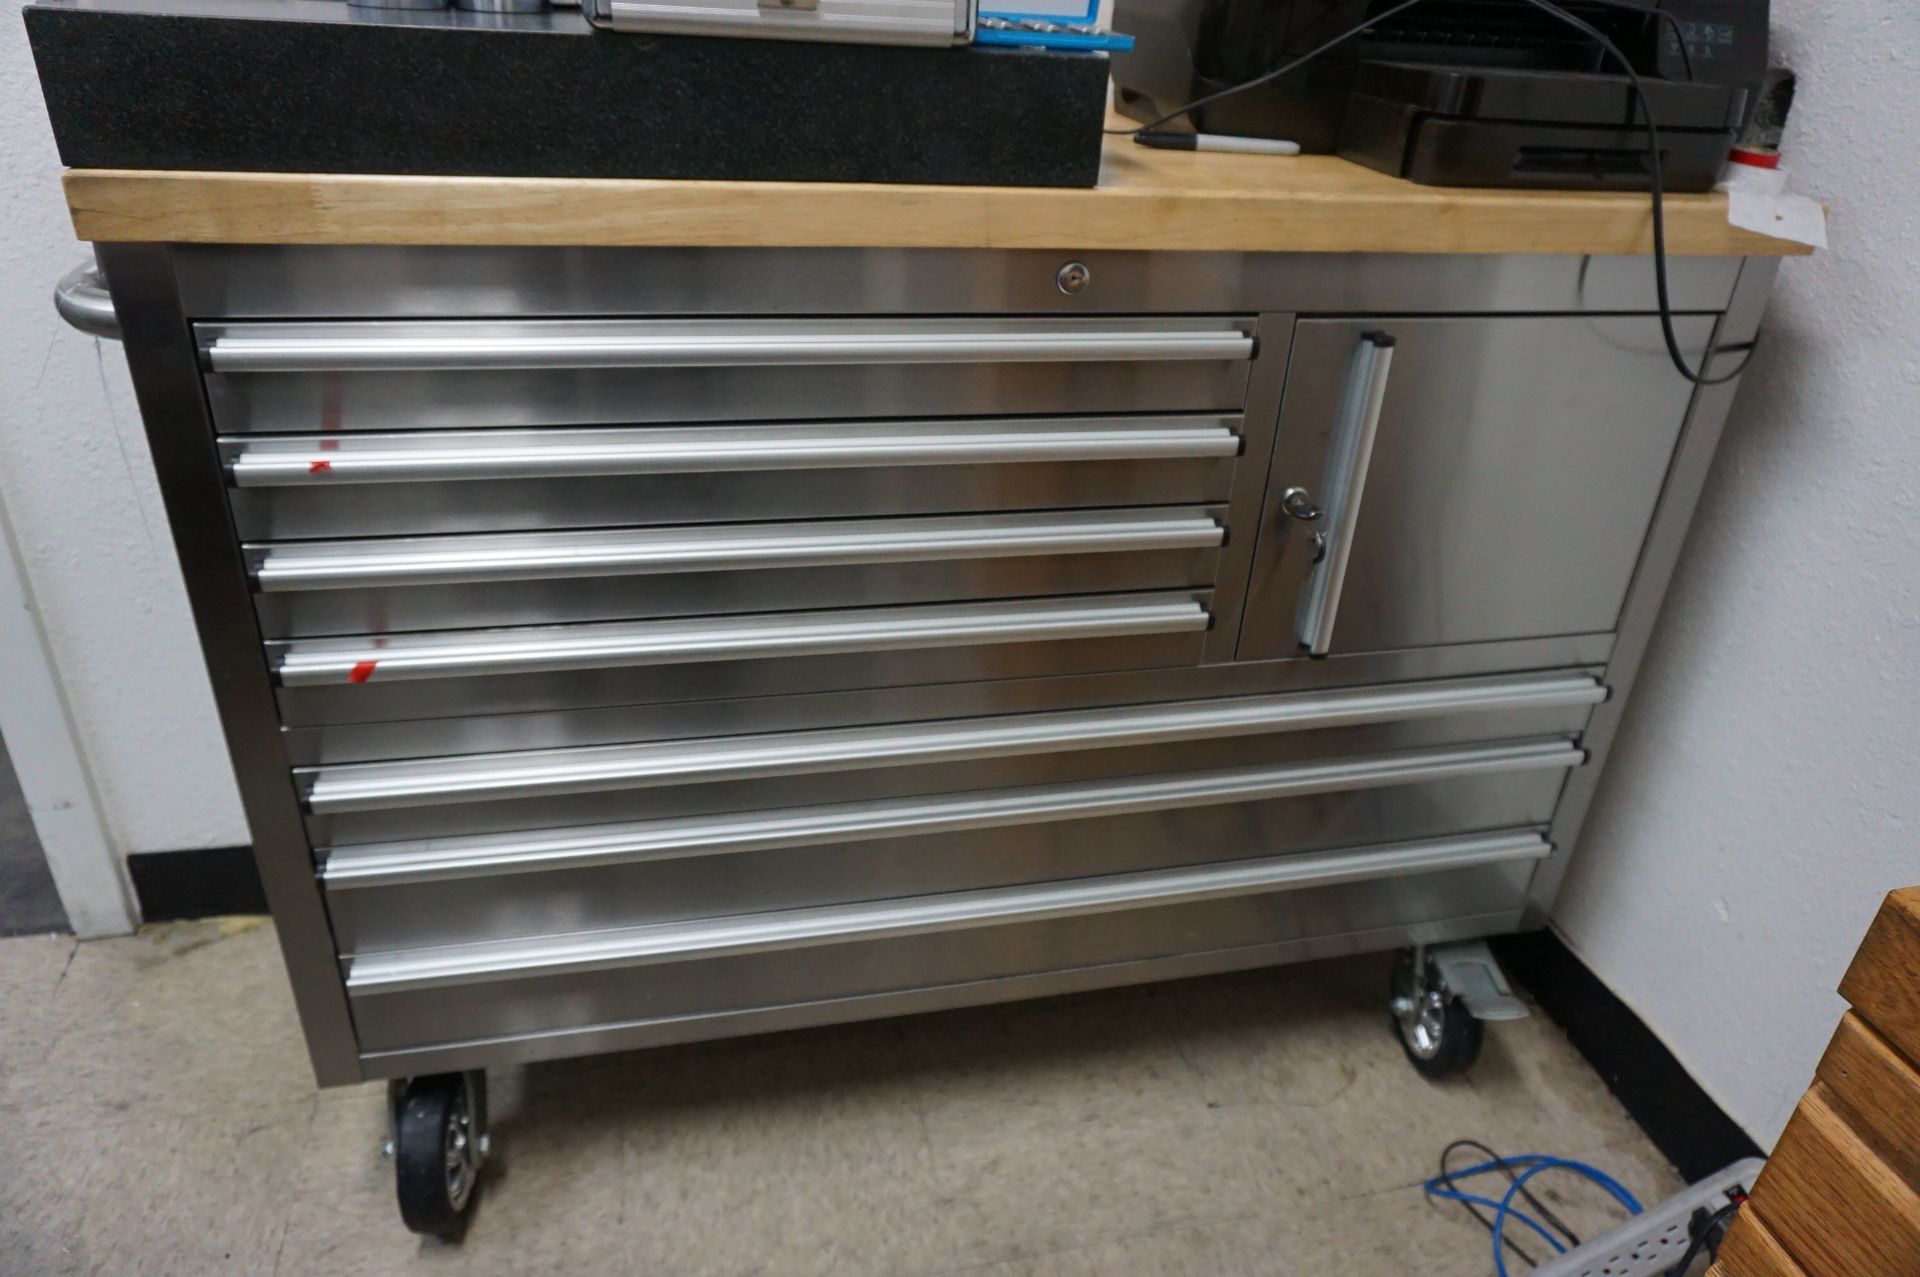 TOOL ORGANIZER LOT TO INCLUDE: (1) 7 DRAWER ROLLING STAINLESS STEEL SHOP CART WITH WOOD TOP, (1)